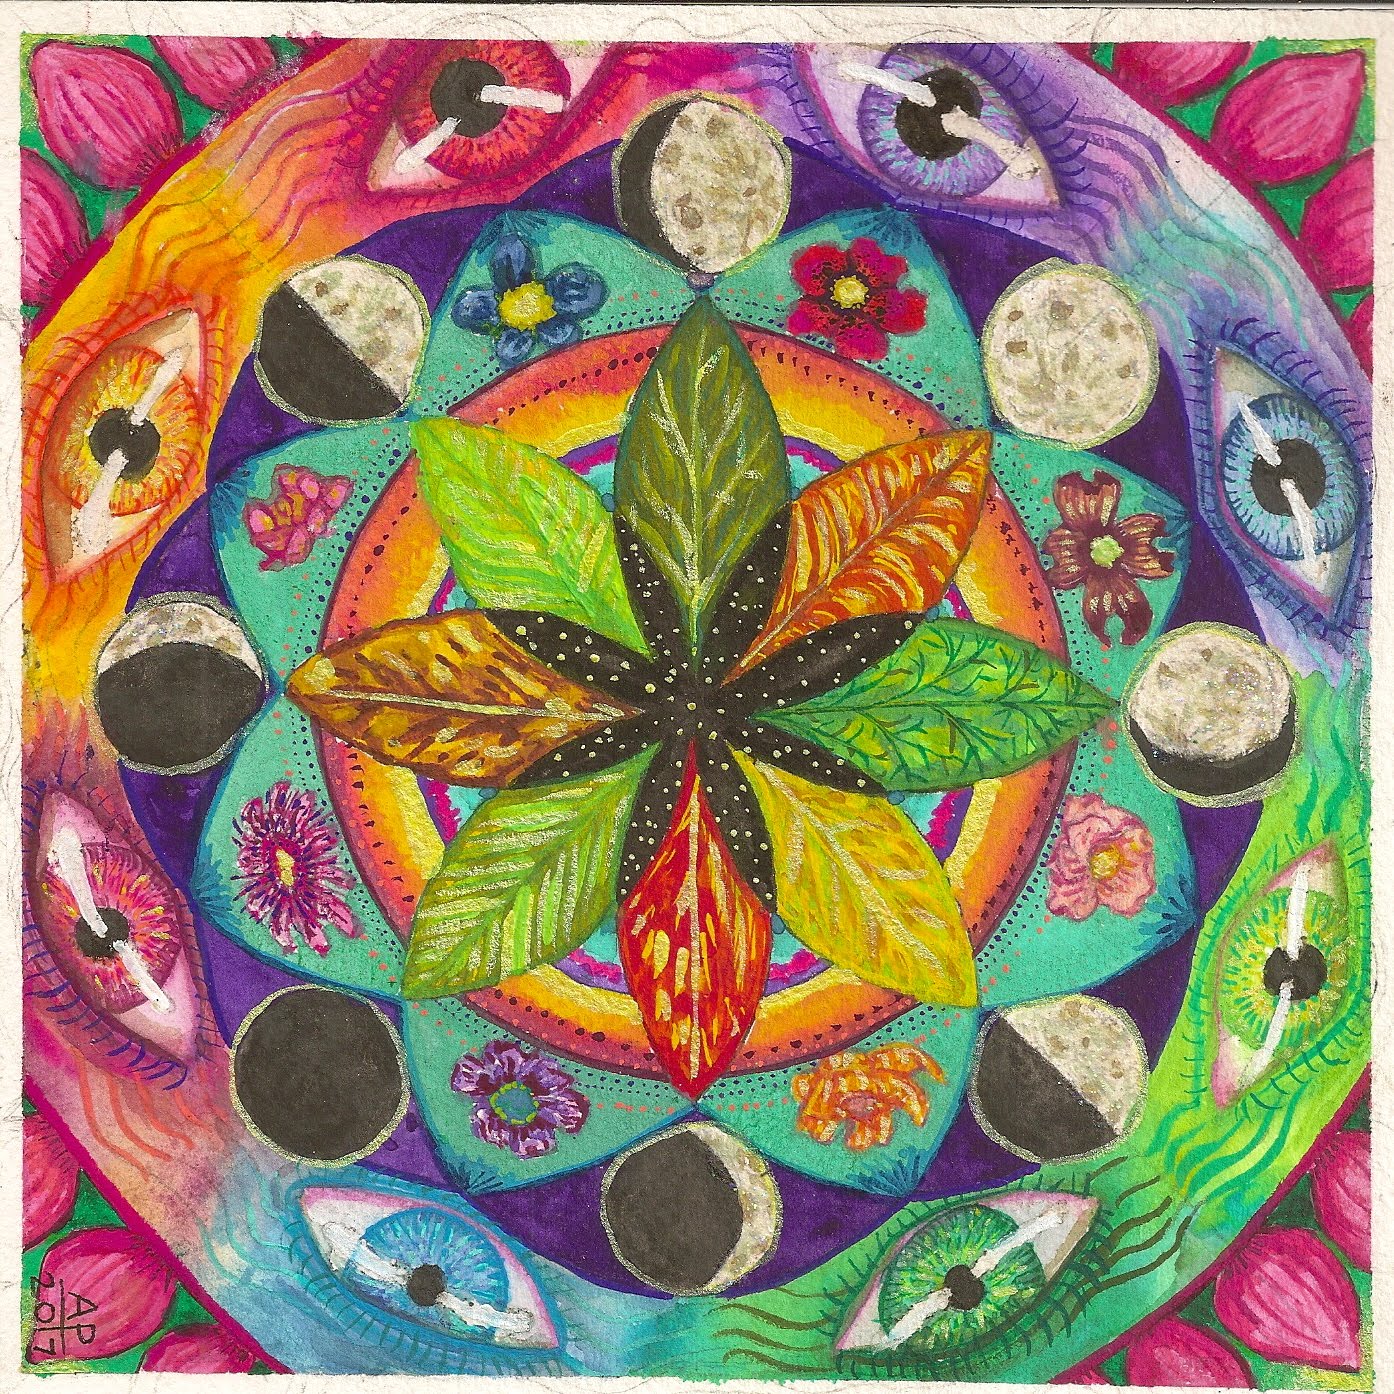 Load video: A series of paintings about the universe and plants with sacred geometry.